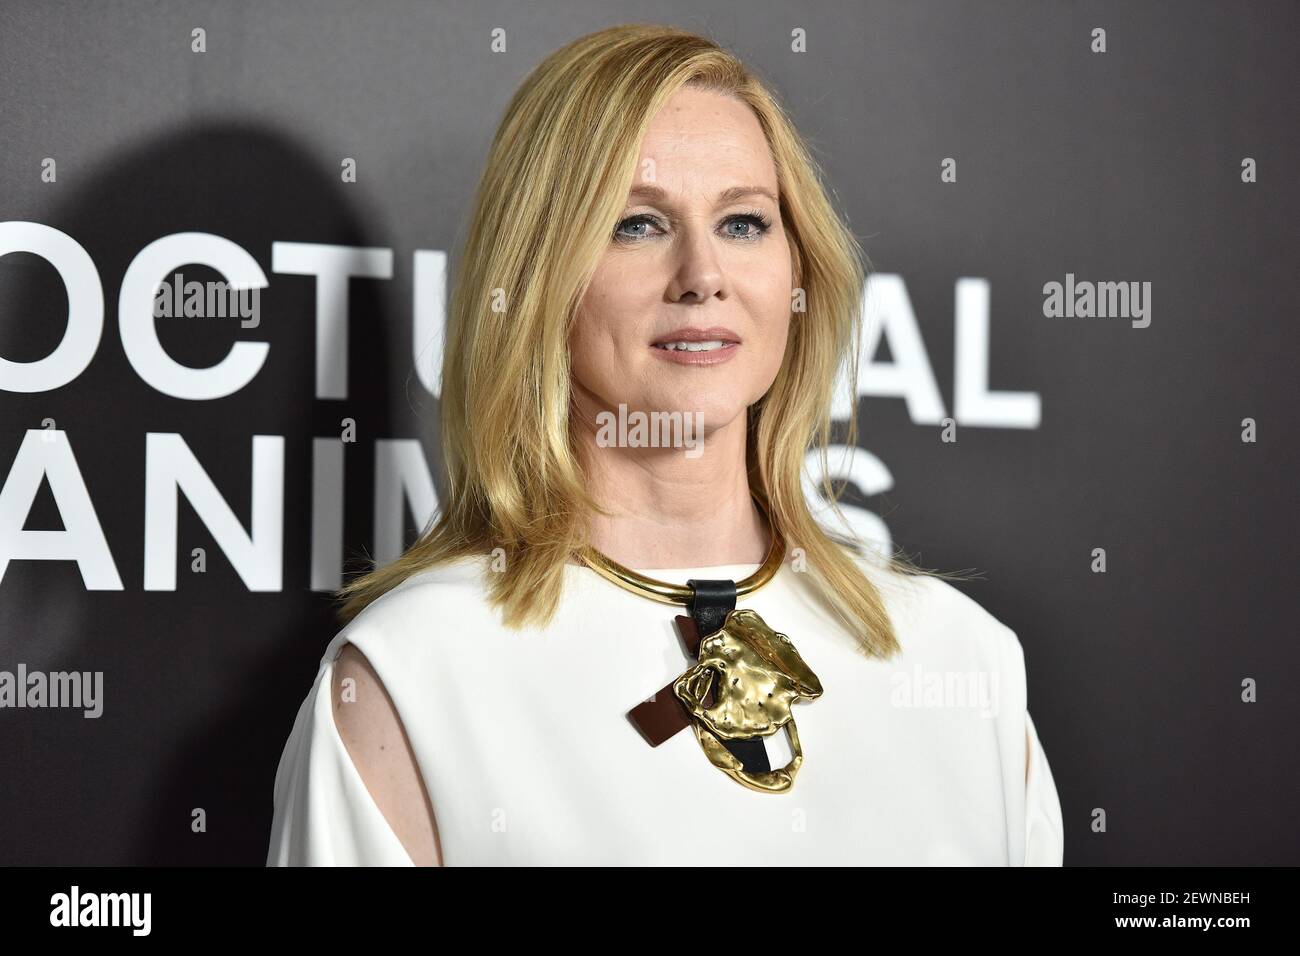 Actress Laura Linney attends the 